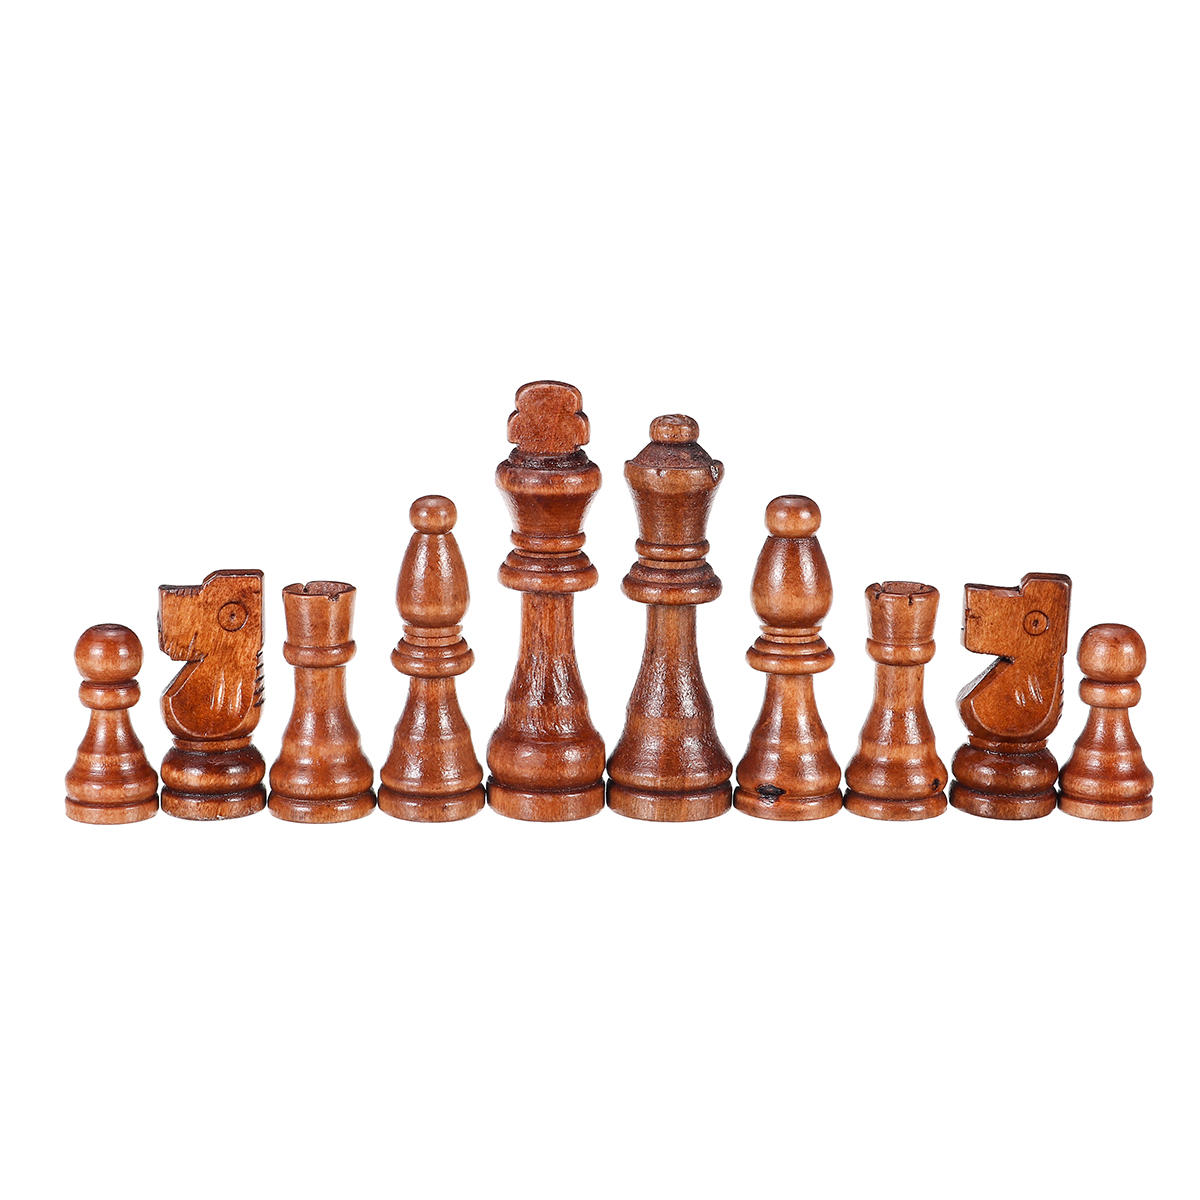 32 Piece Wooden Carved Chess 91mm King Chessman Hand Crafted Set Outdoor 